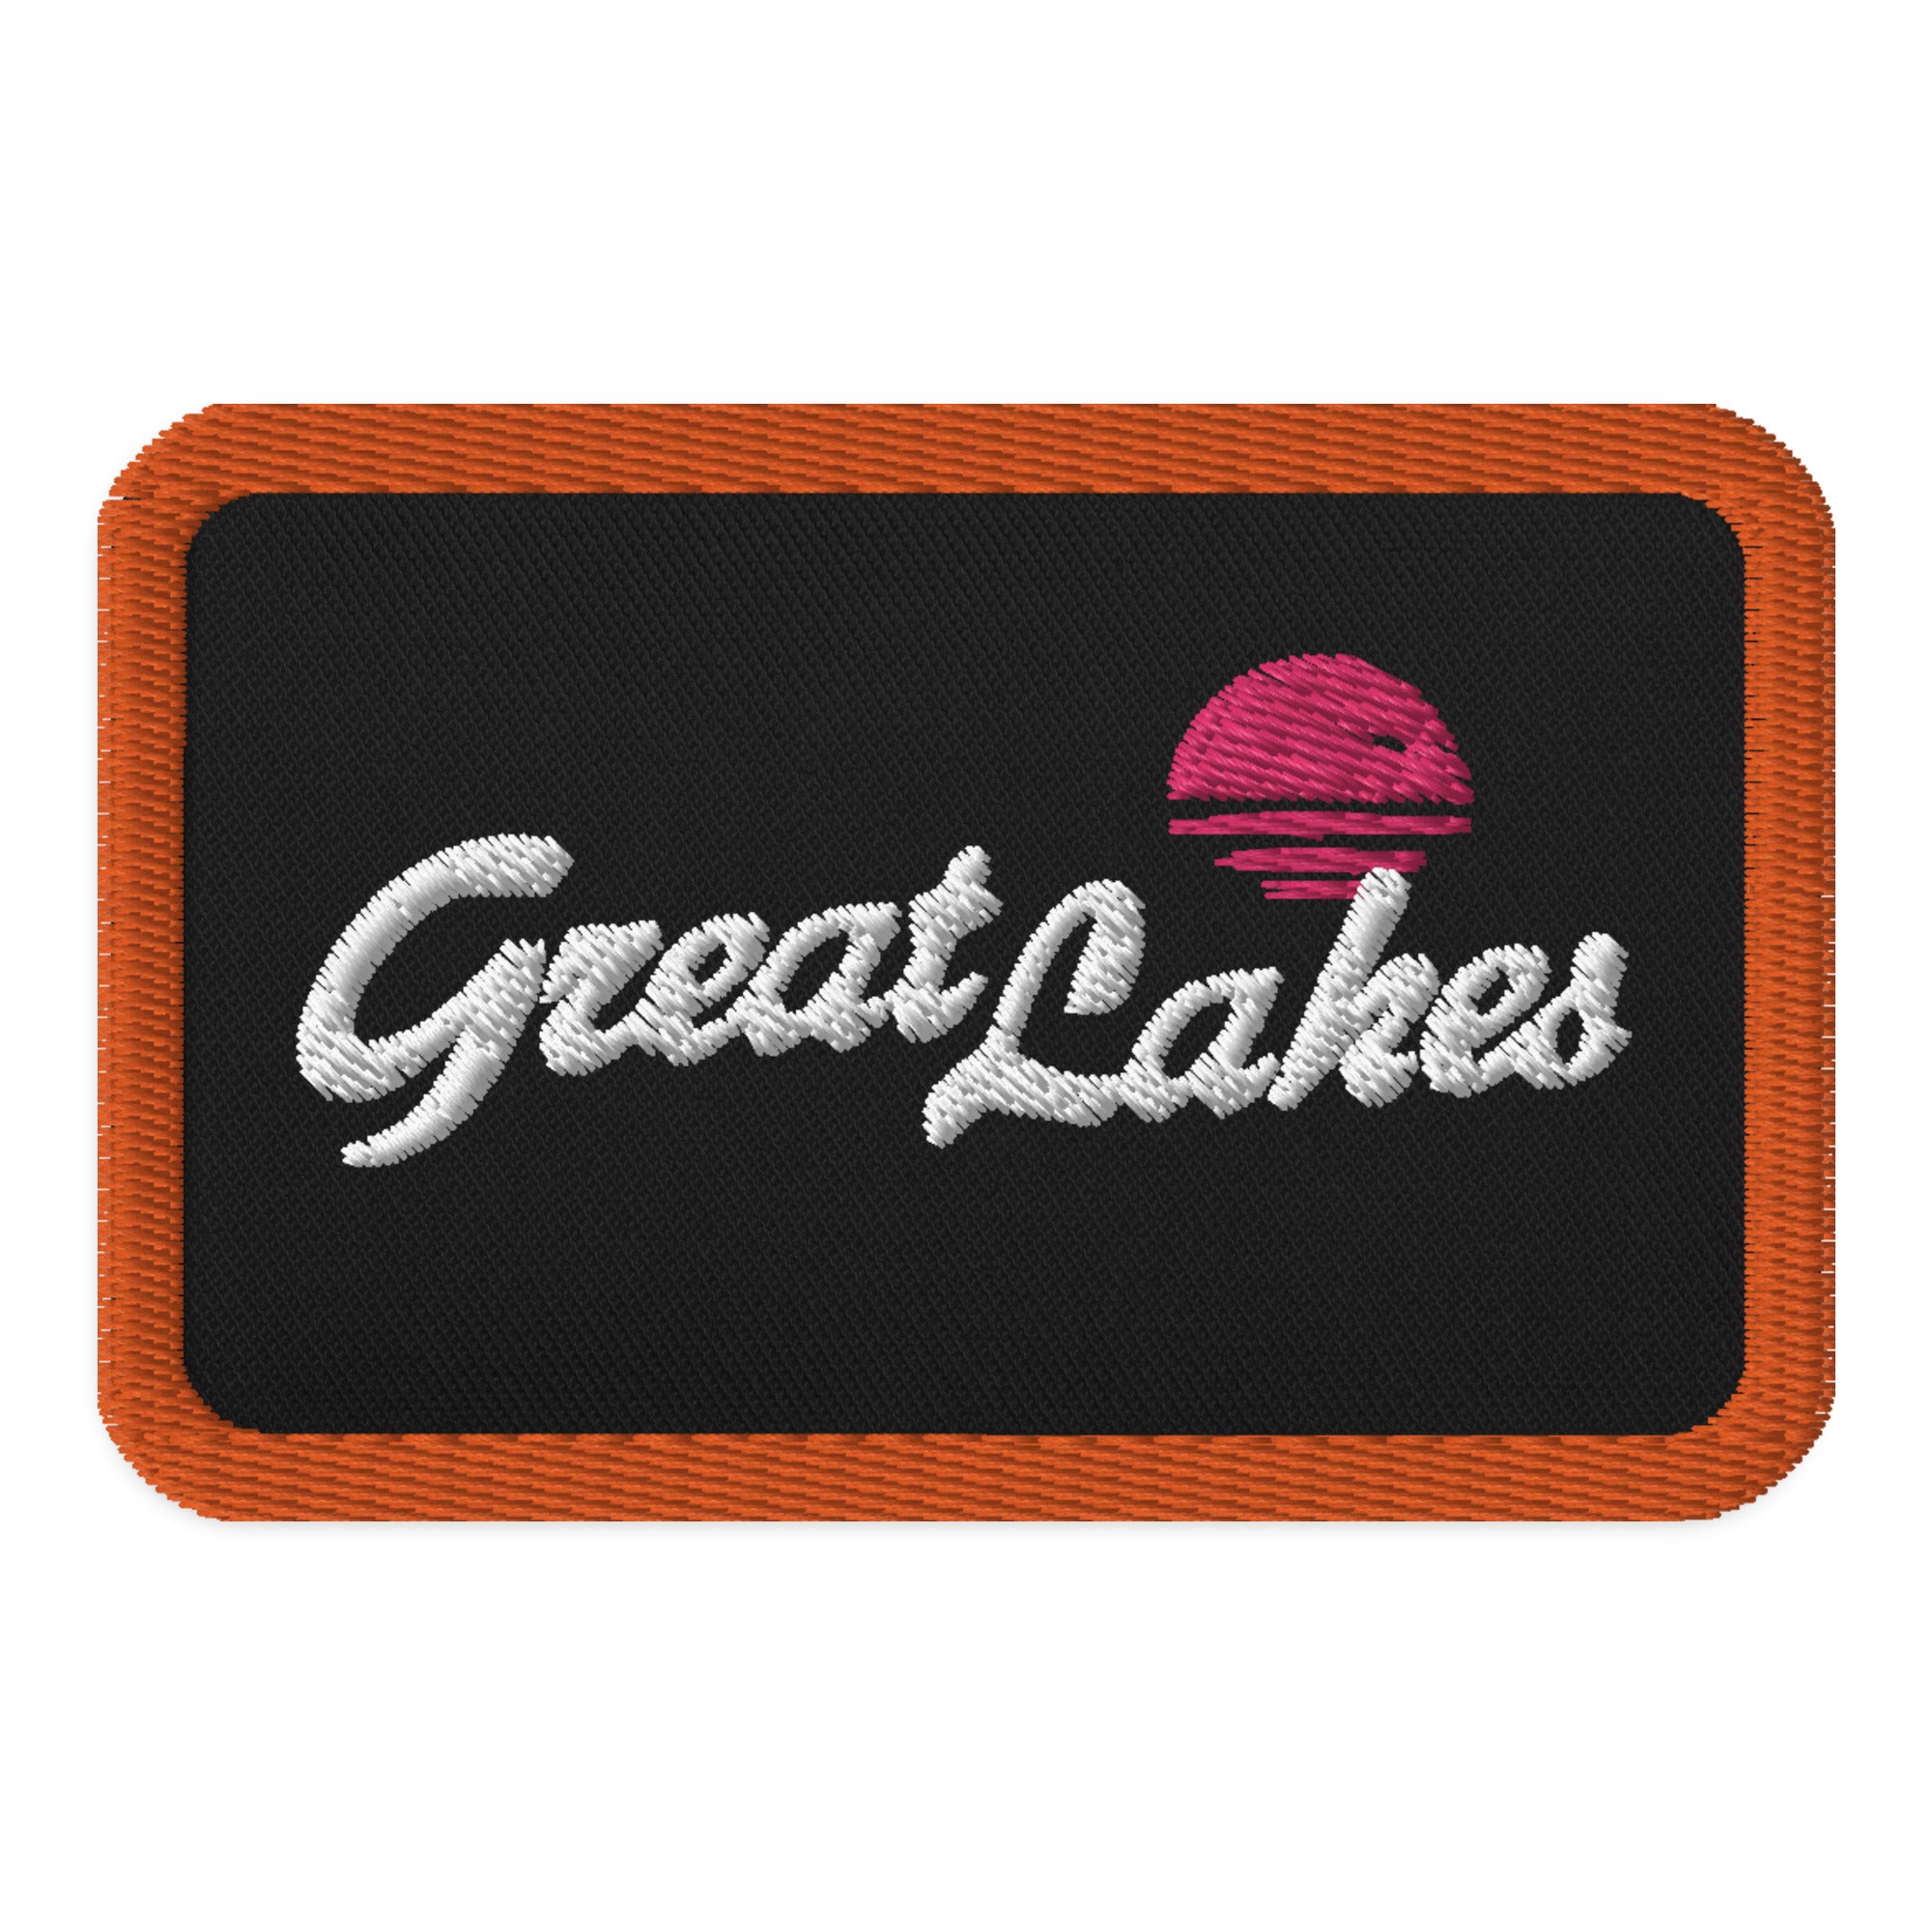 Great Lakes Sunset Embroidered Patch